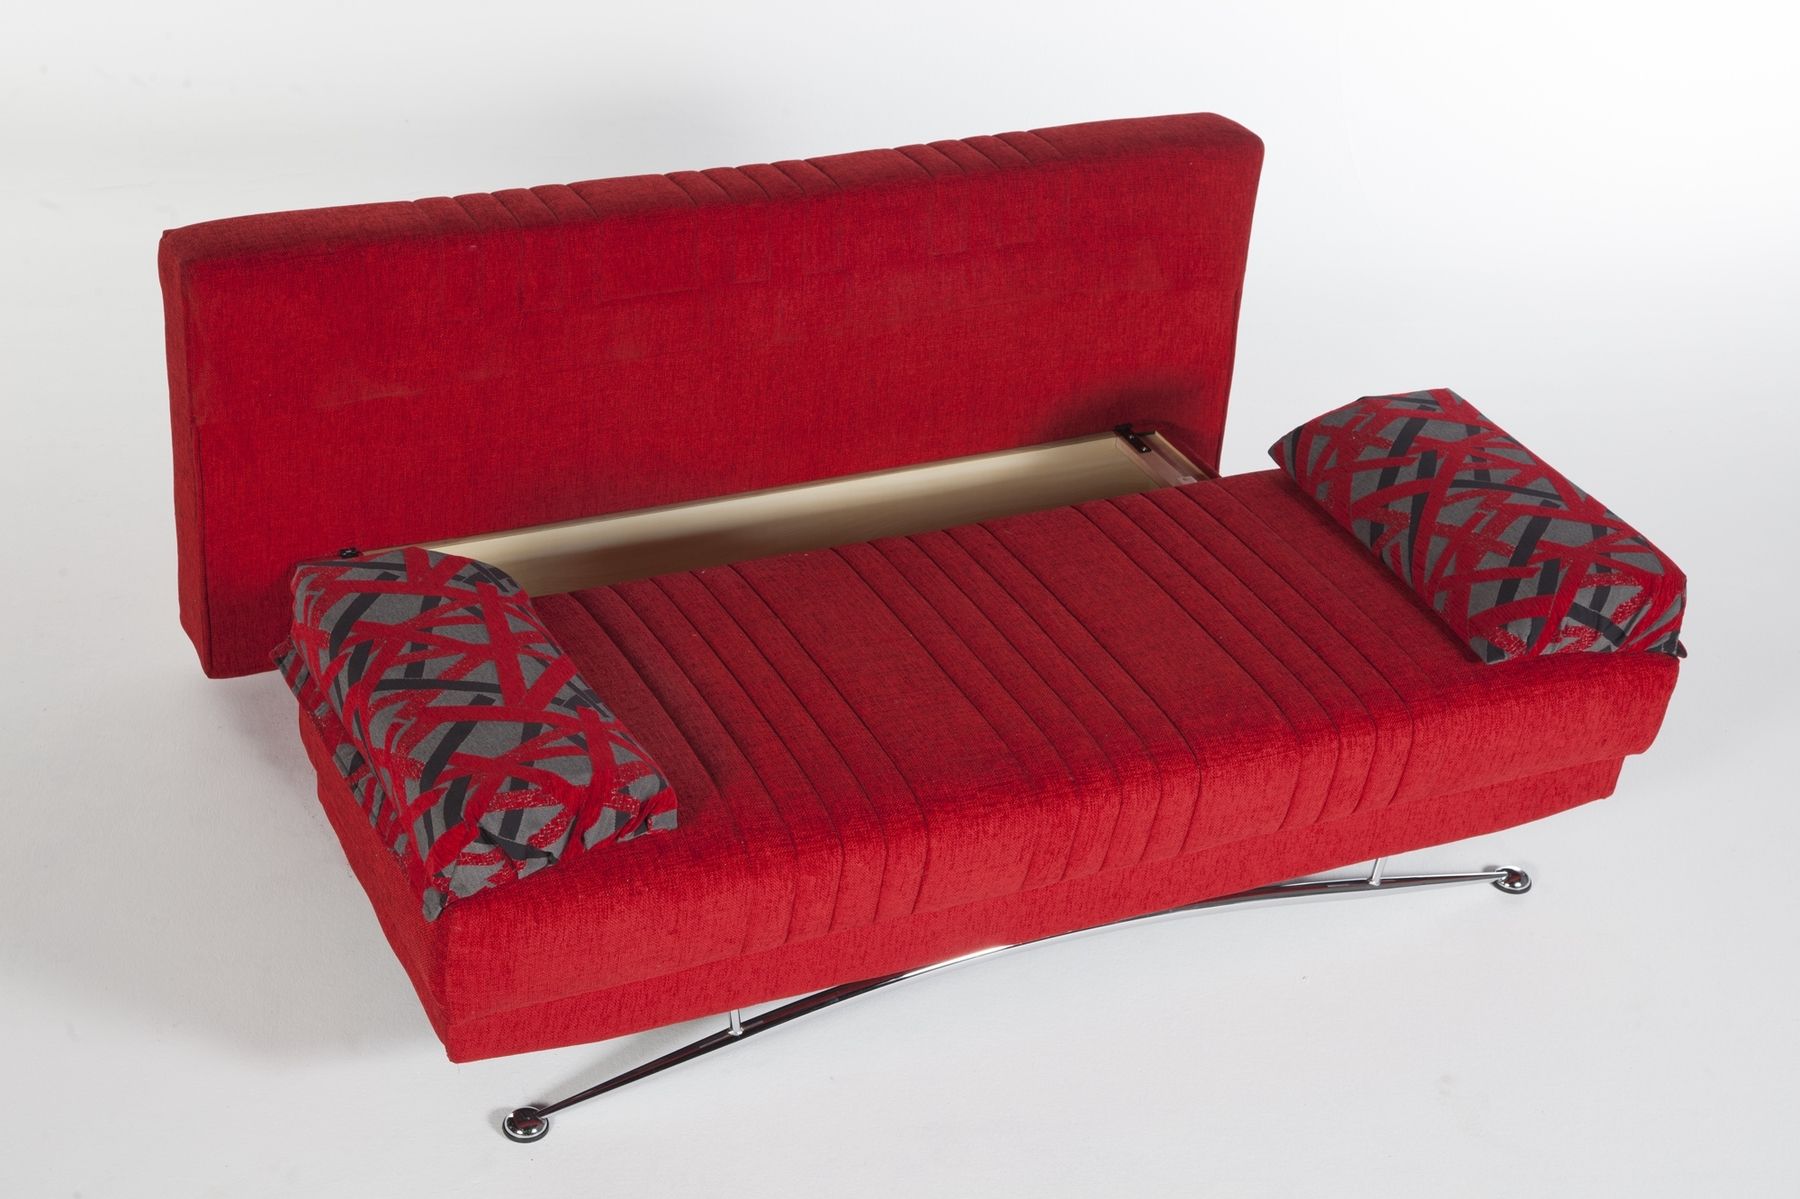 Fashionable Fantasy Red Sofa Bed Sufantasy Sunset Furniture Sleepers, Sofa Within Red Sleeper Sofas (View 15 of 15)